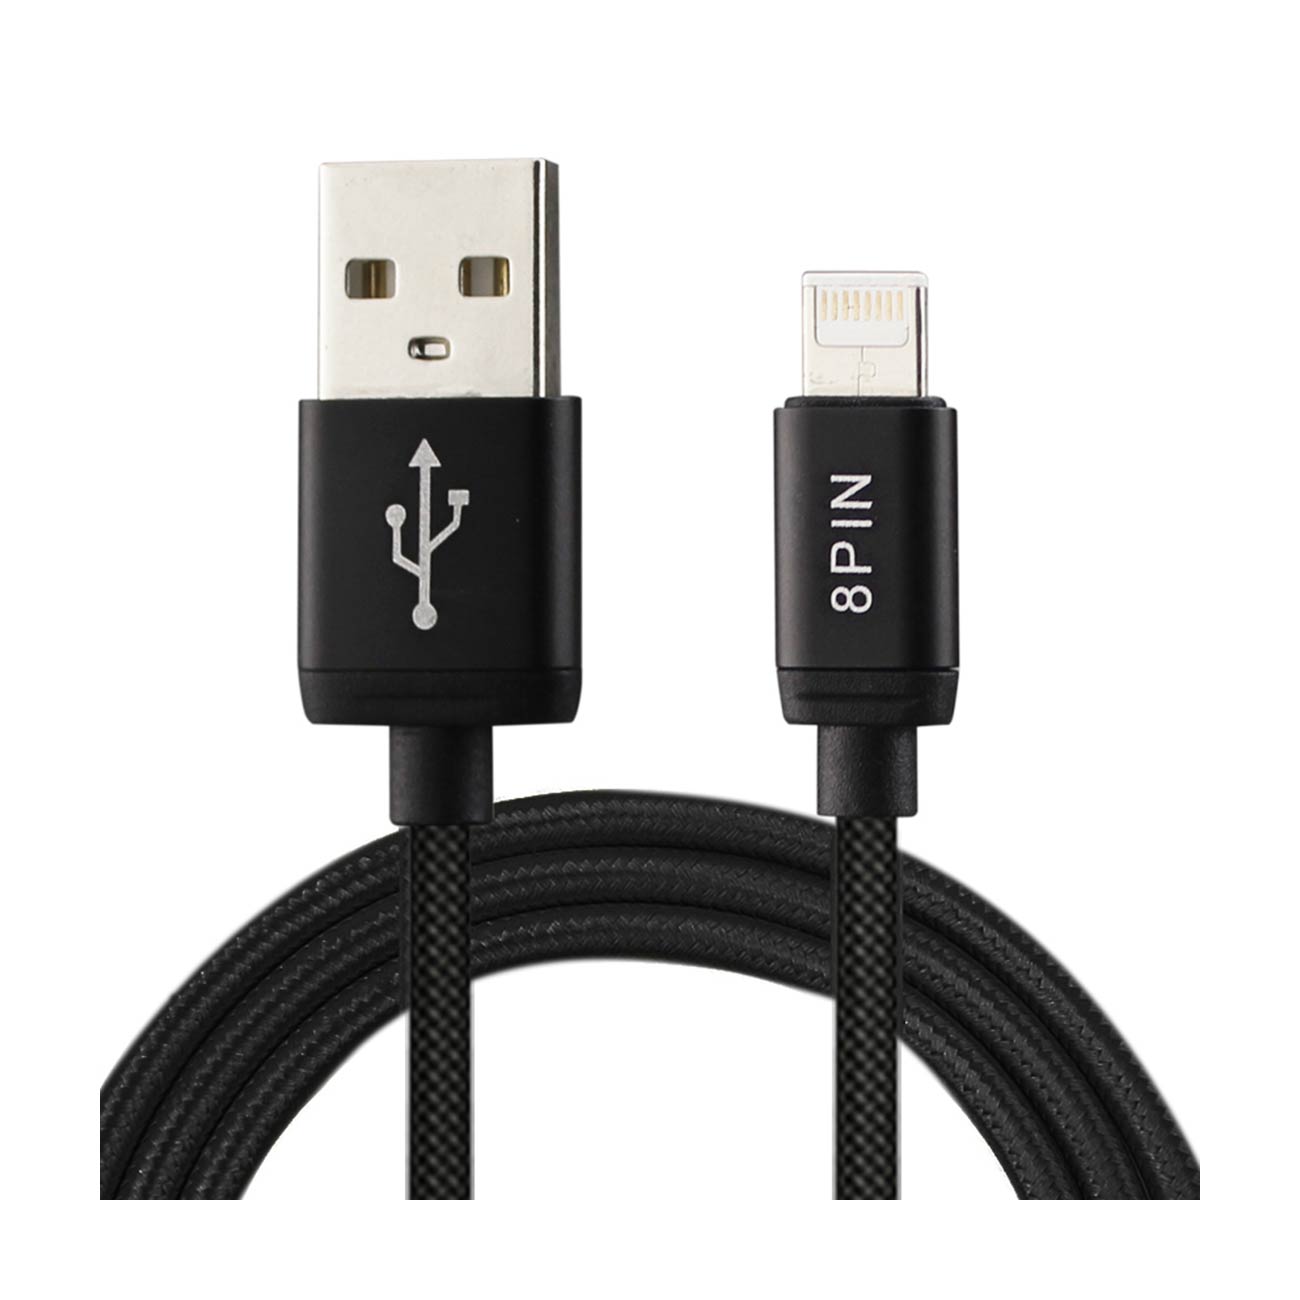 Cable USB Micro 8-PIN Reversible 2-In-1 Nylon Braided 3.3Ft Black Color